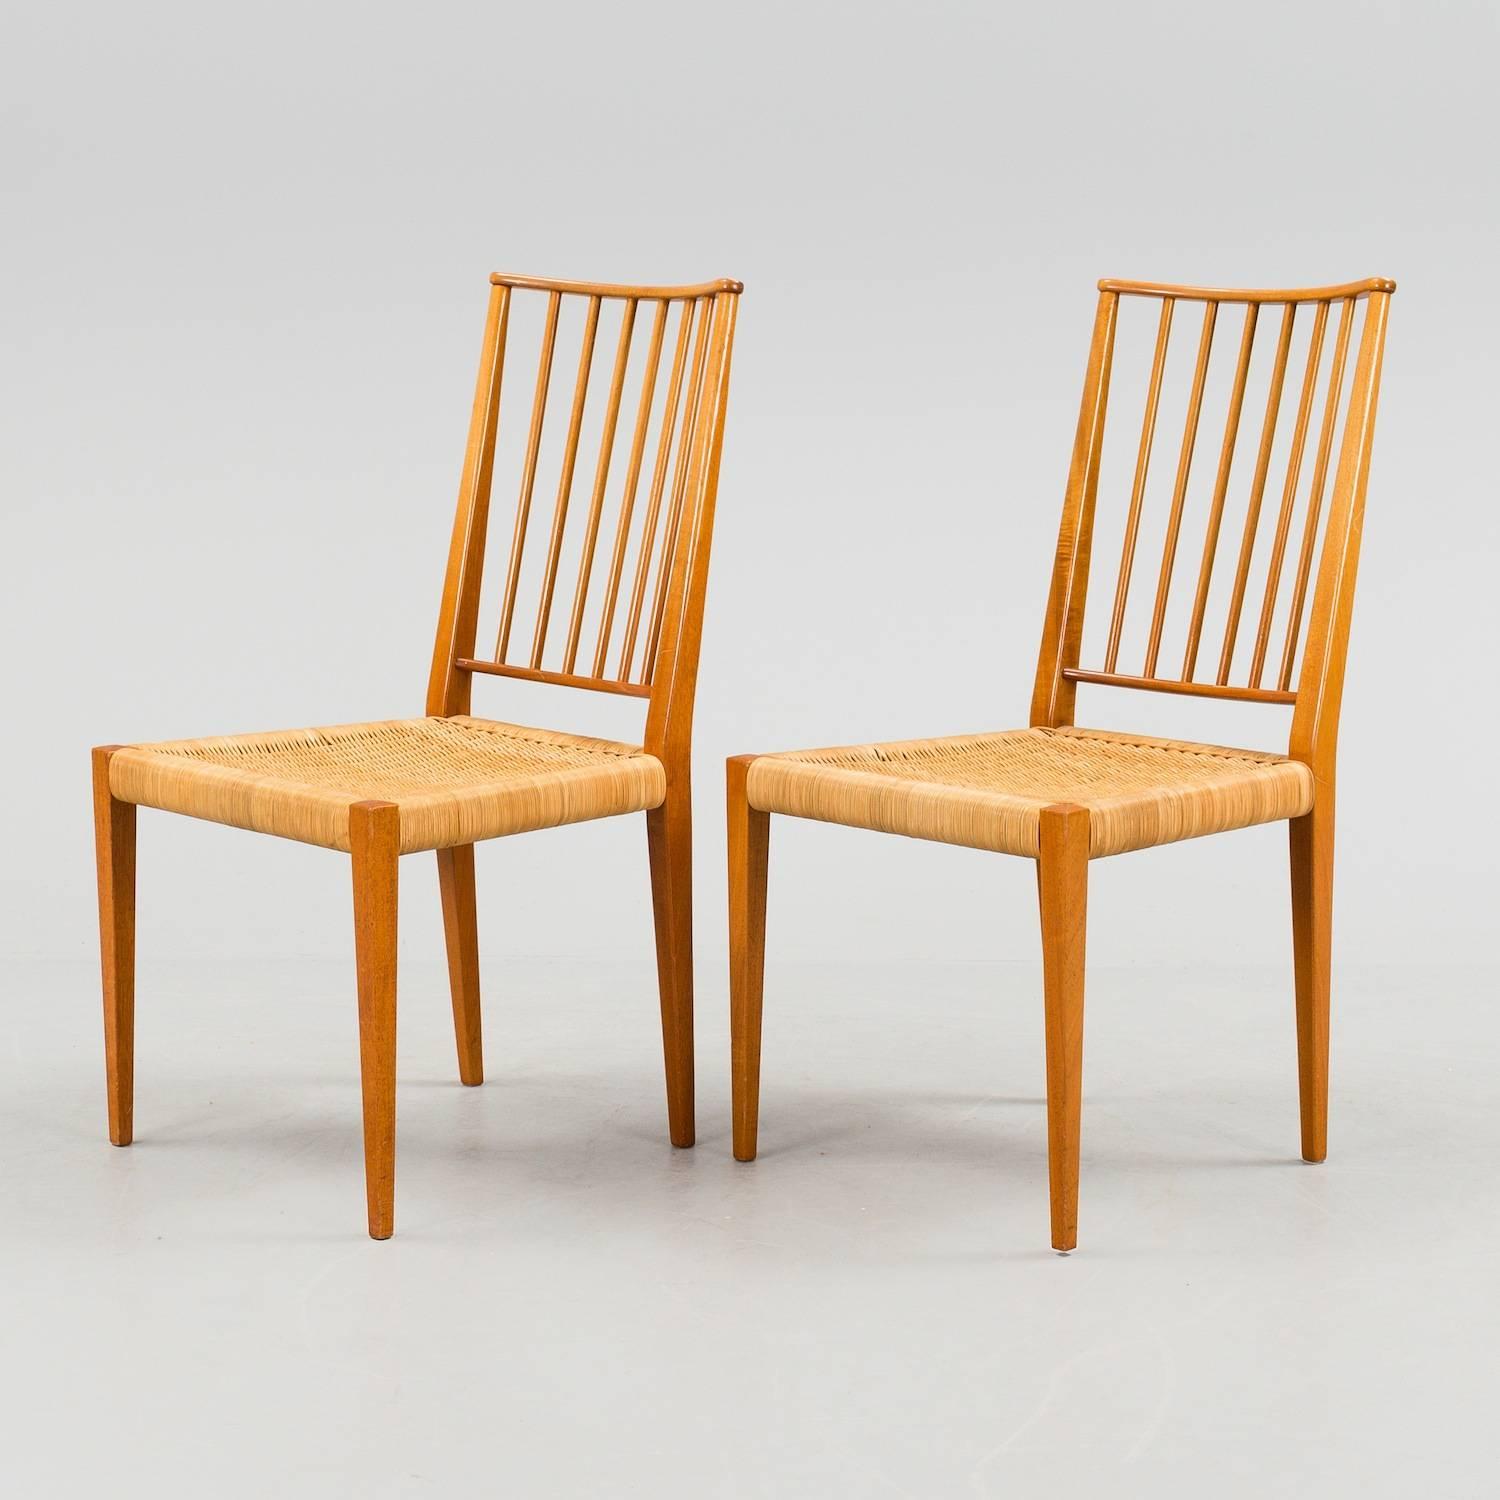 Designed by Josef Frank in the 1920s for Haus und Garten (House and Garden) company in Vienna and first produced by Svenskt Tenn in 1938. In 1968, the chair was displayed in mahogany with a woven rattan seat at the Nationalmuseum’s Josef Frank